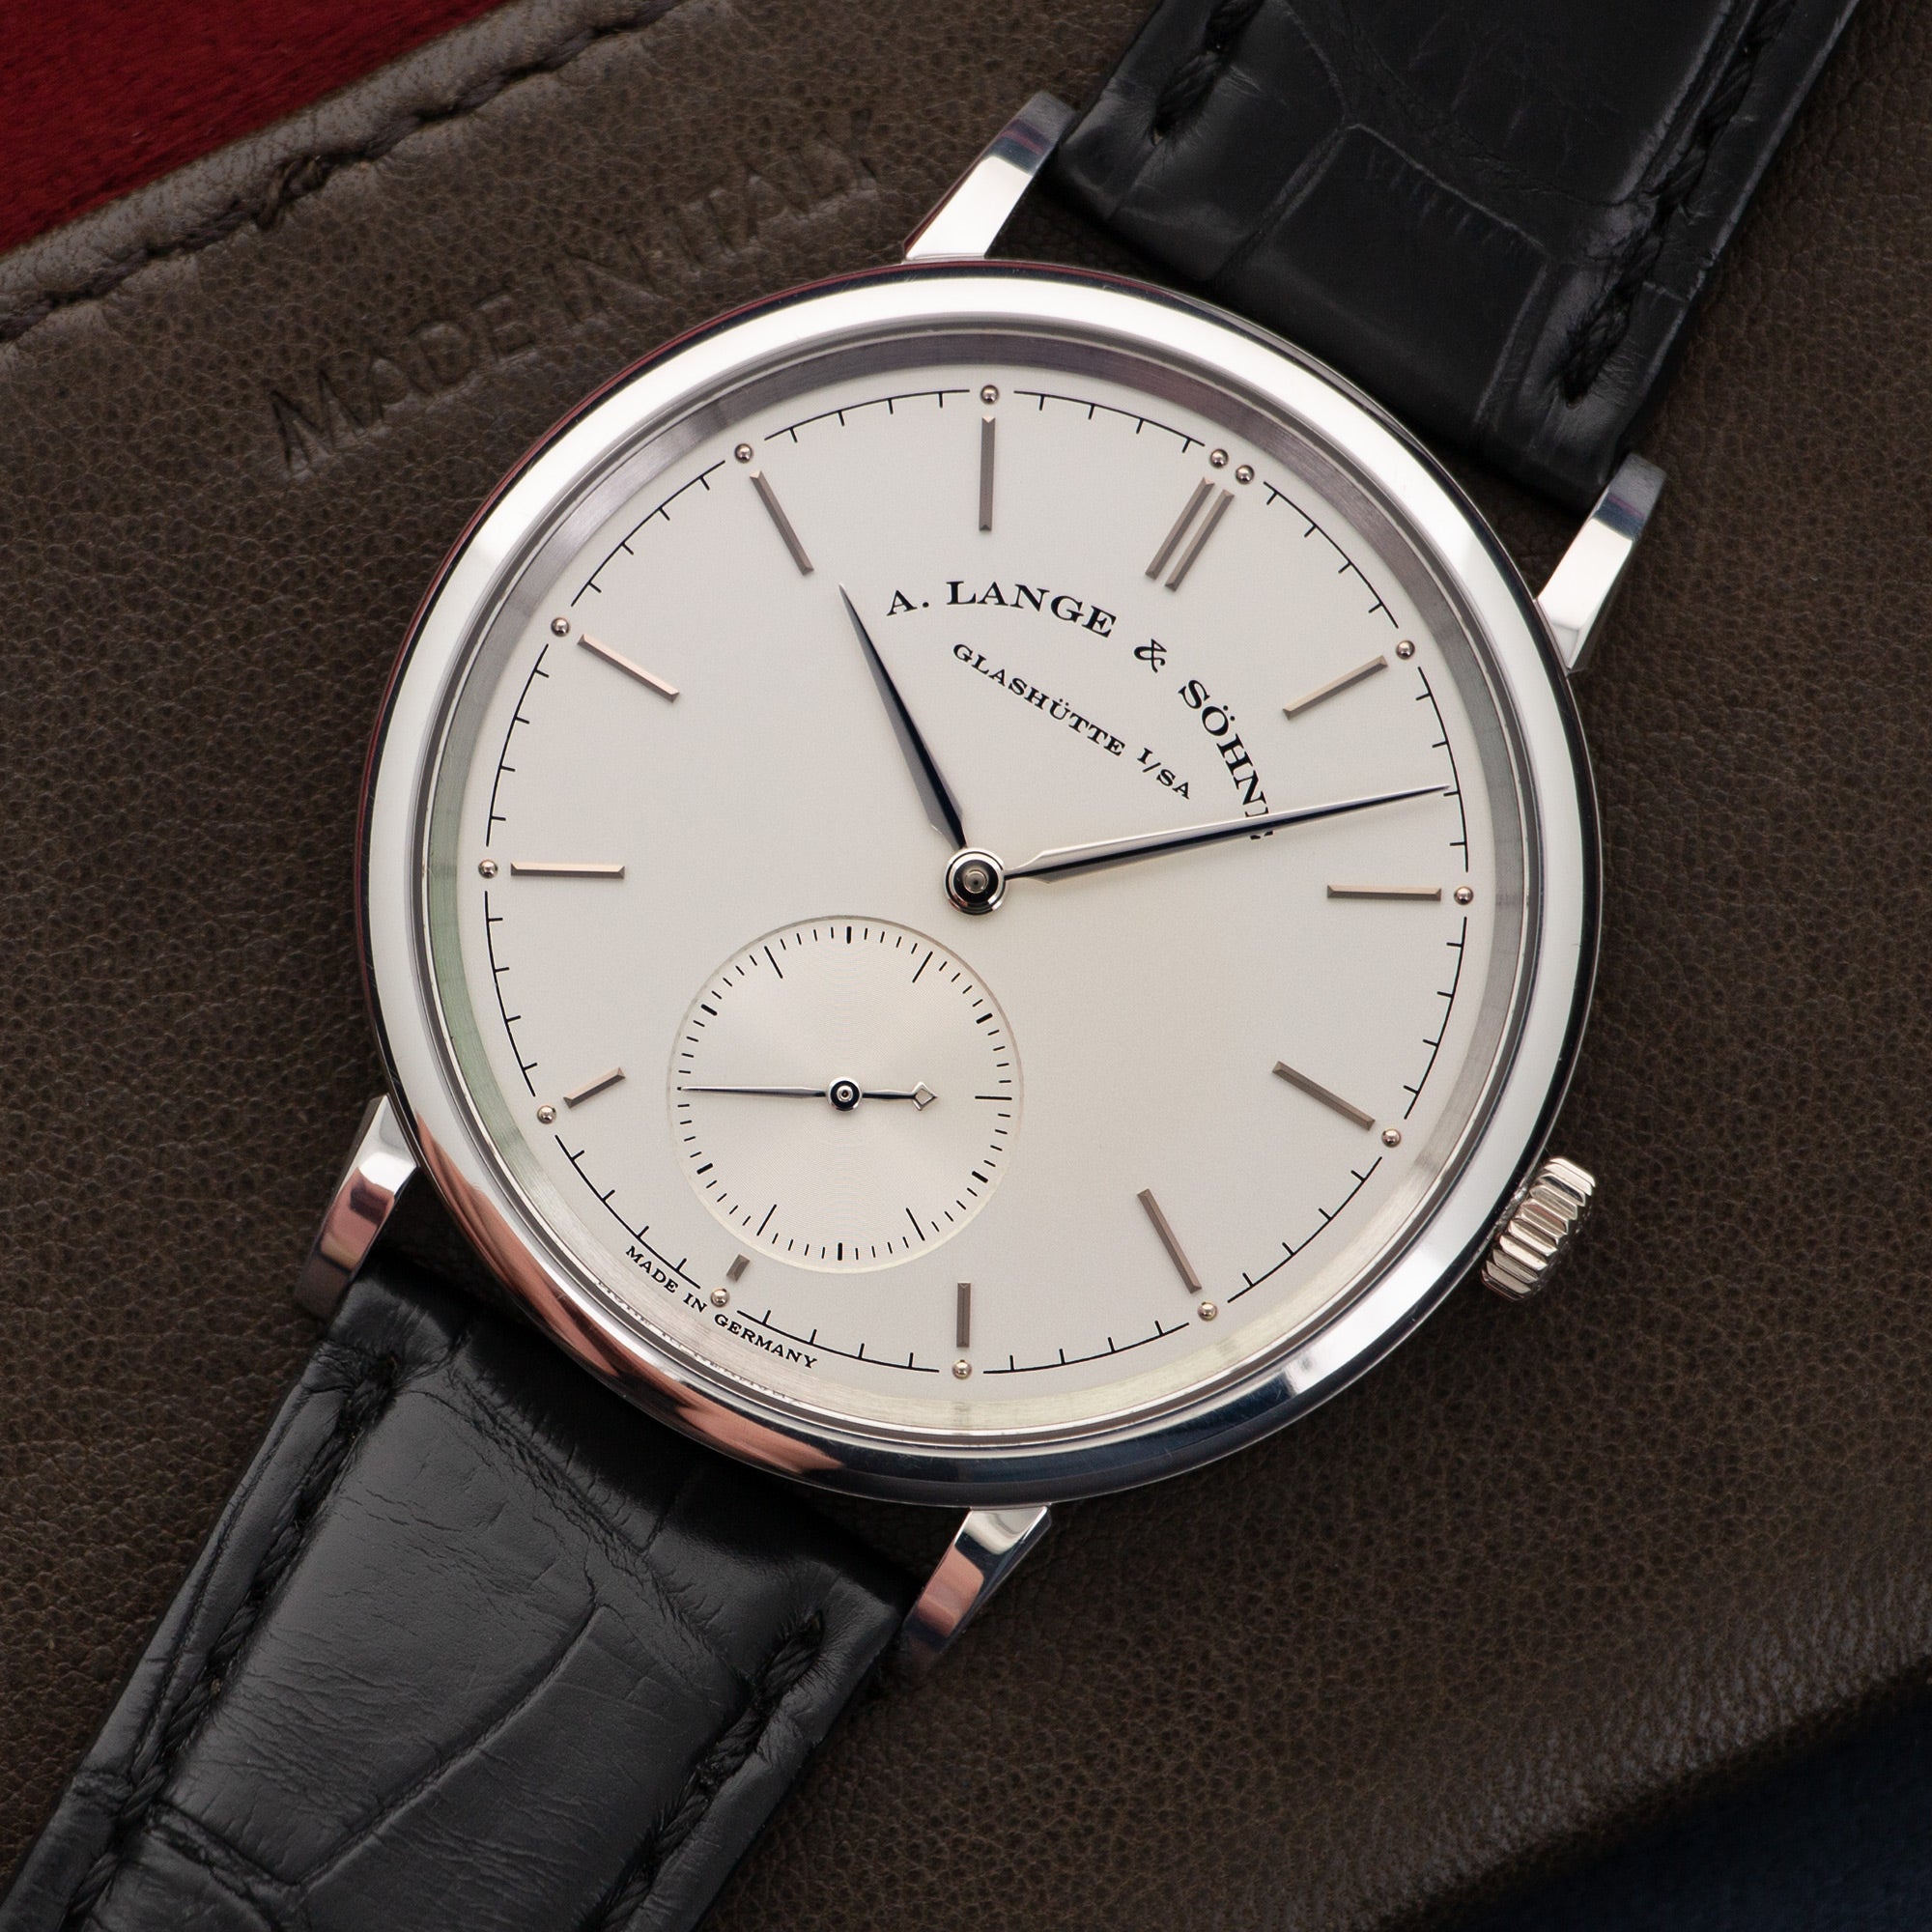 A. Lange & Sohne - A. Lange & Sohne White Gold Saxonia Automatic Watch Ref. 380.027 - The Keystone Watches